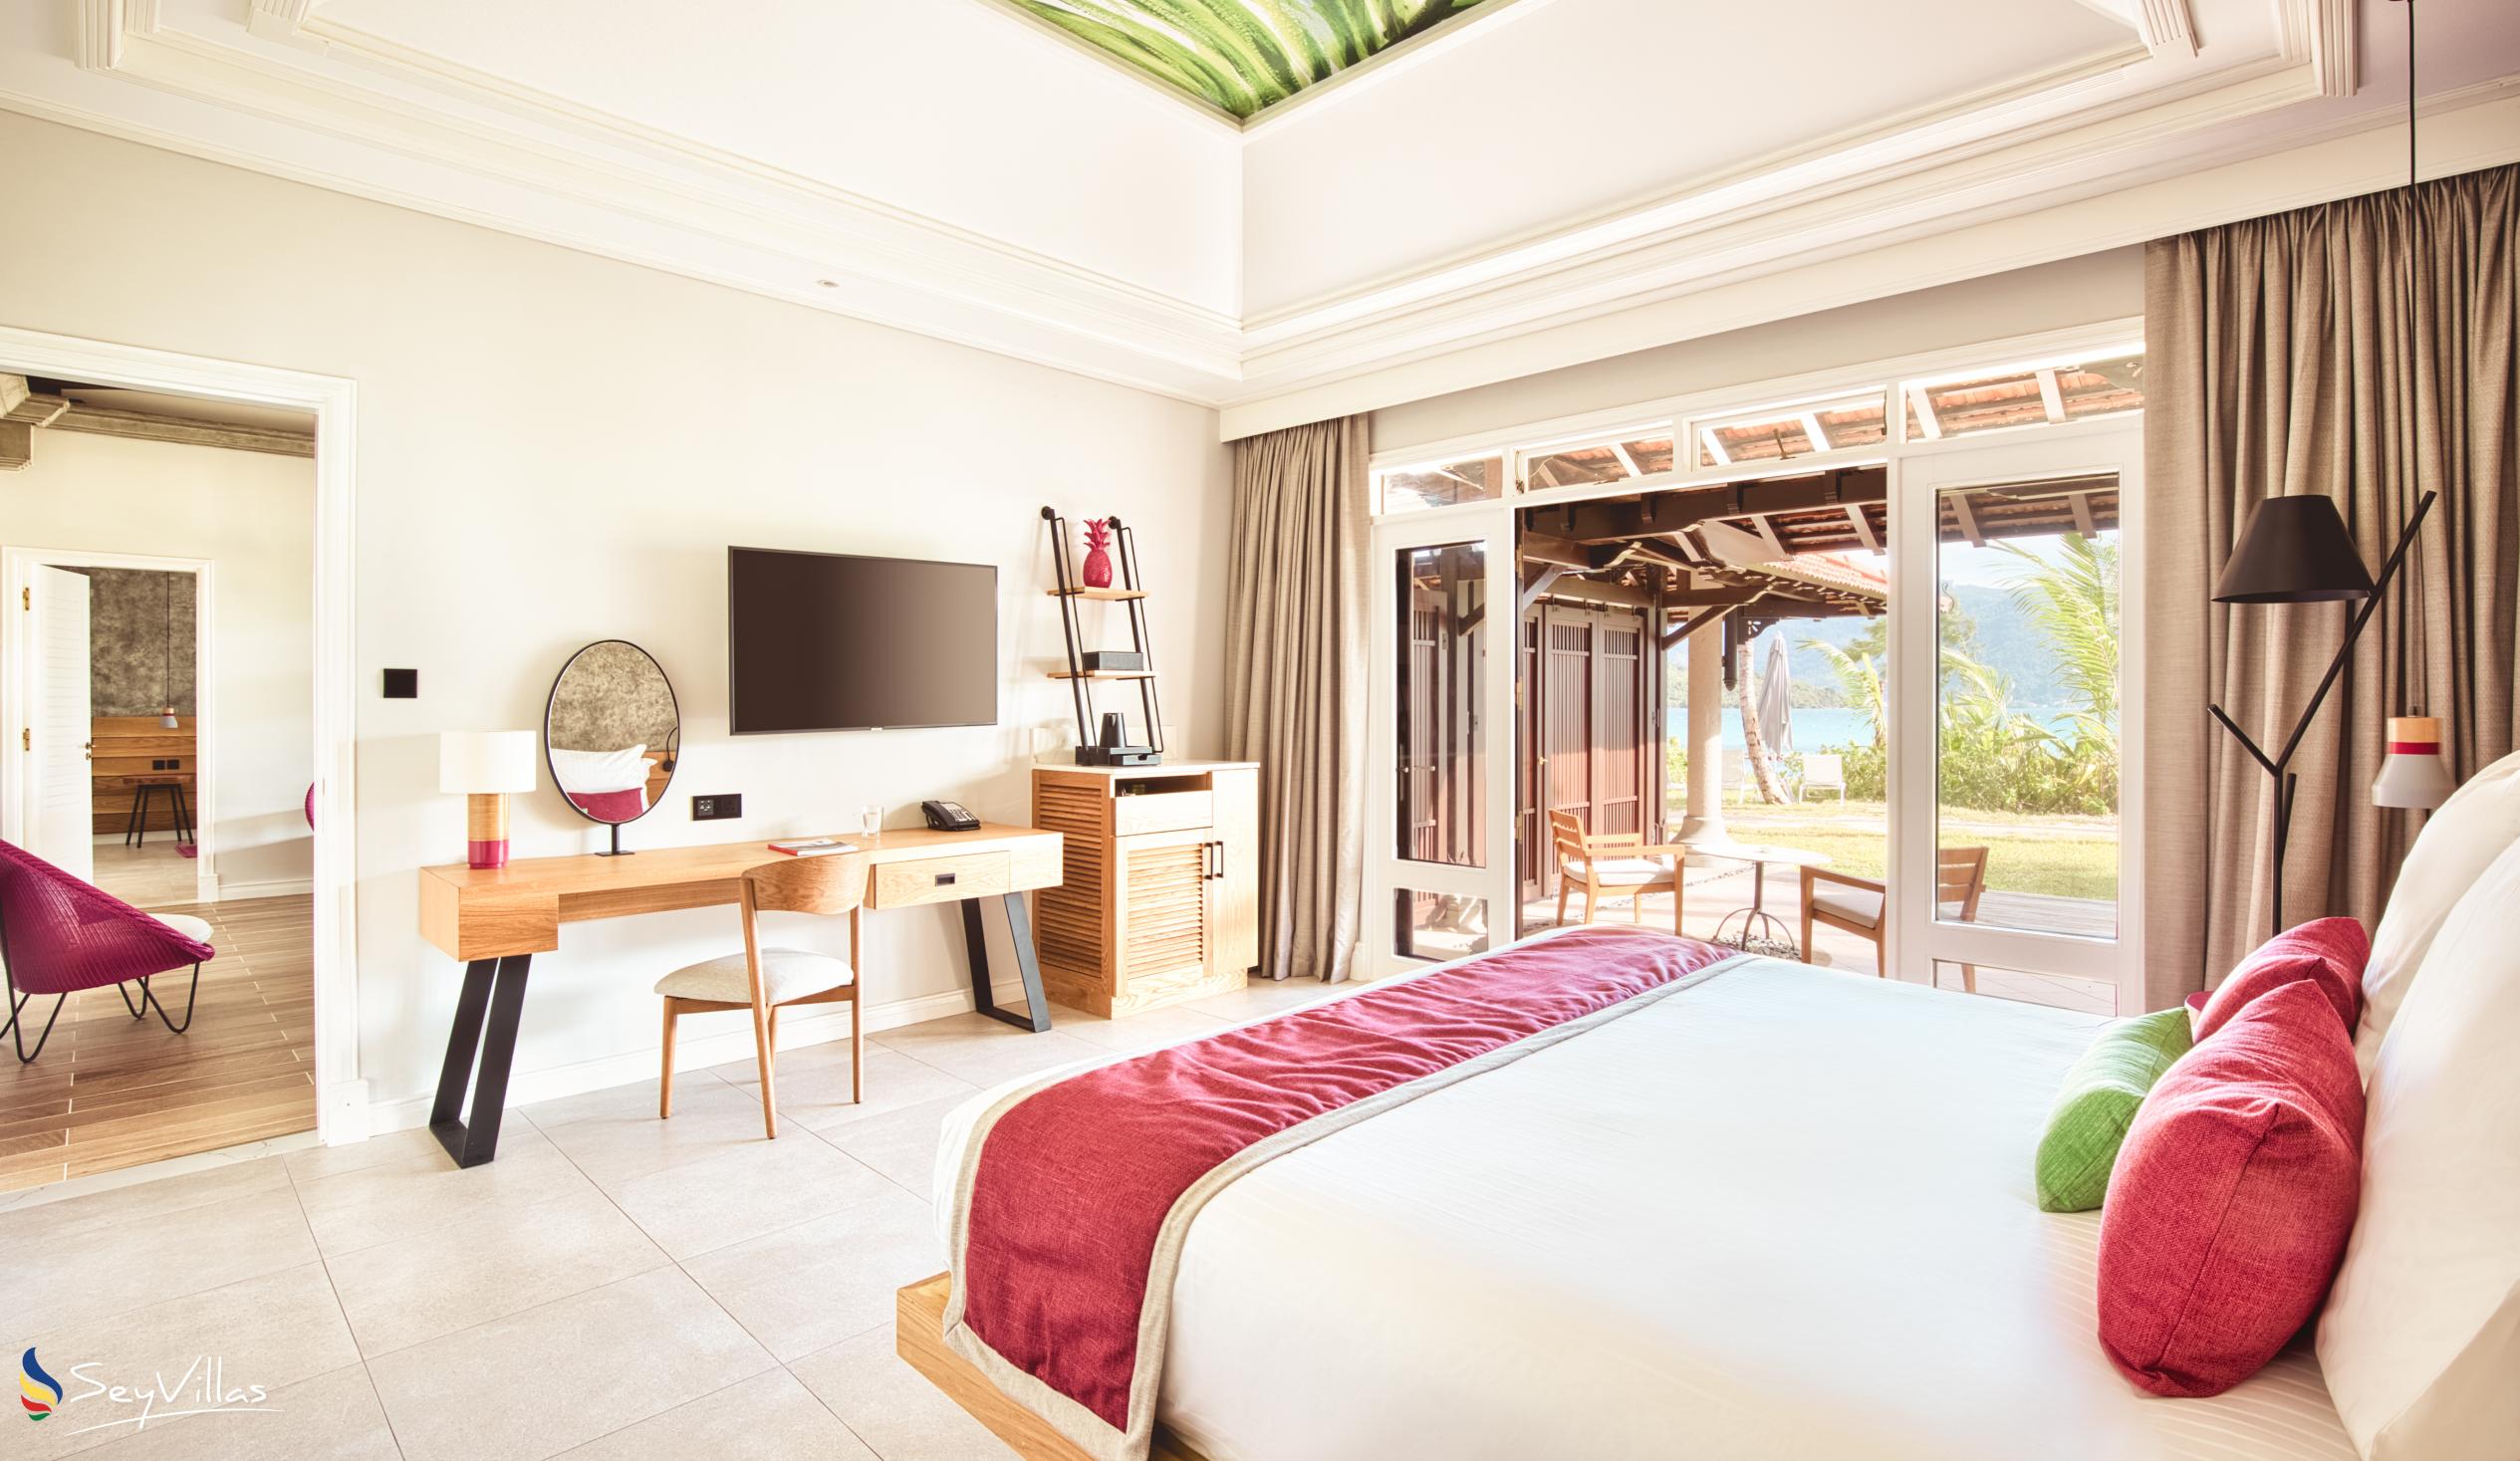 Photo 93: Club Med Seychelles - Family Suite with Private Pool - Saint Anne (Seychelles)